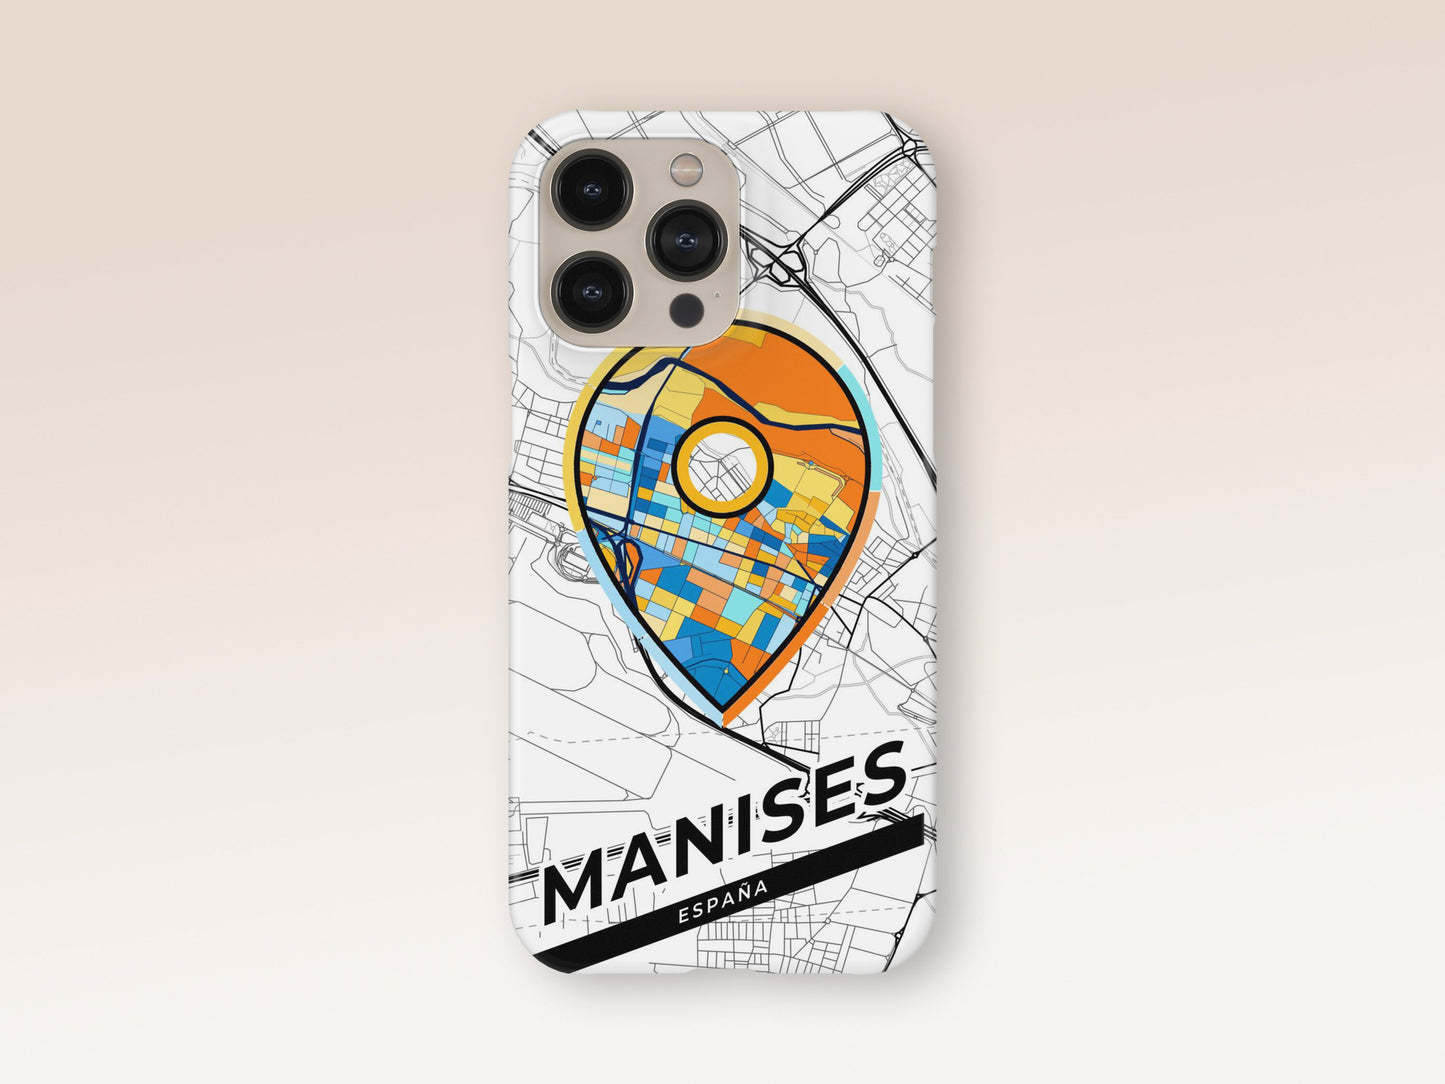 Manises Spain slim phone case with colorful icon. Birthday, wedding or housewarming gift. Couple match cases. 1